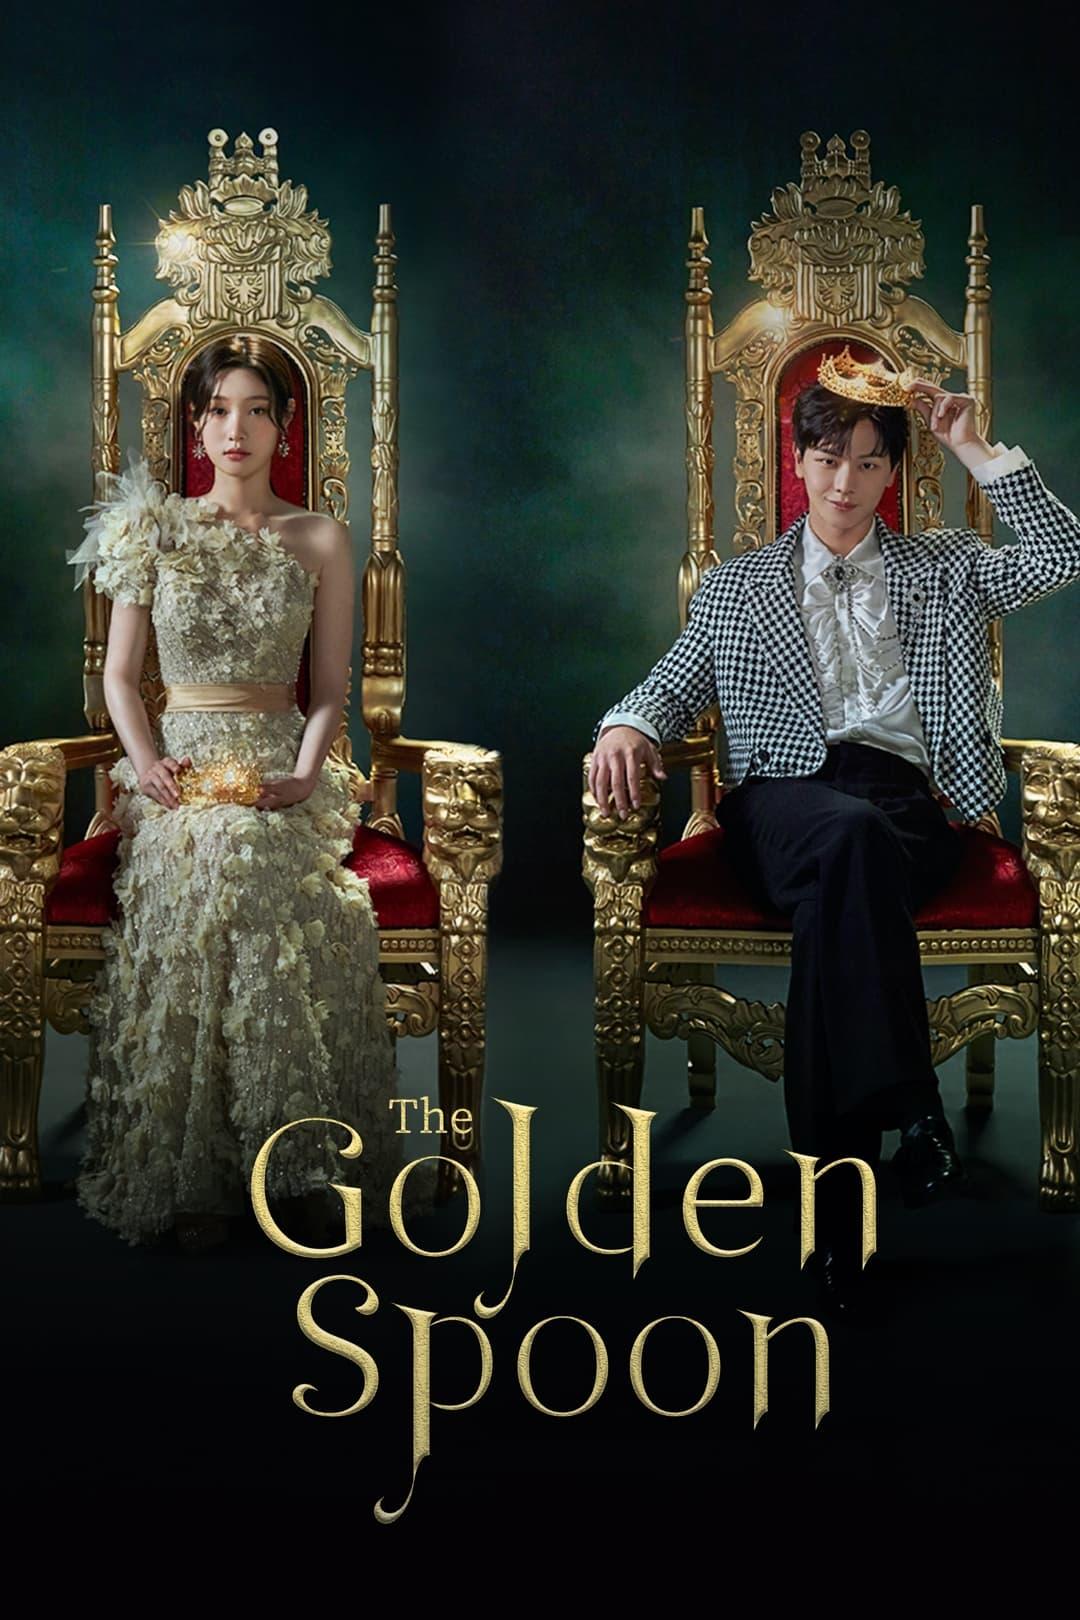 The Golden Spoon poster